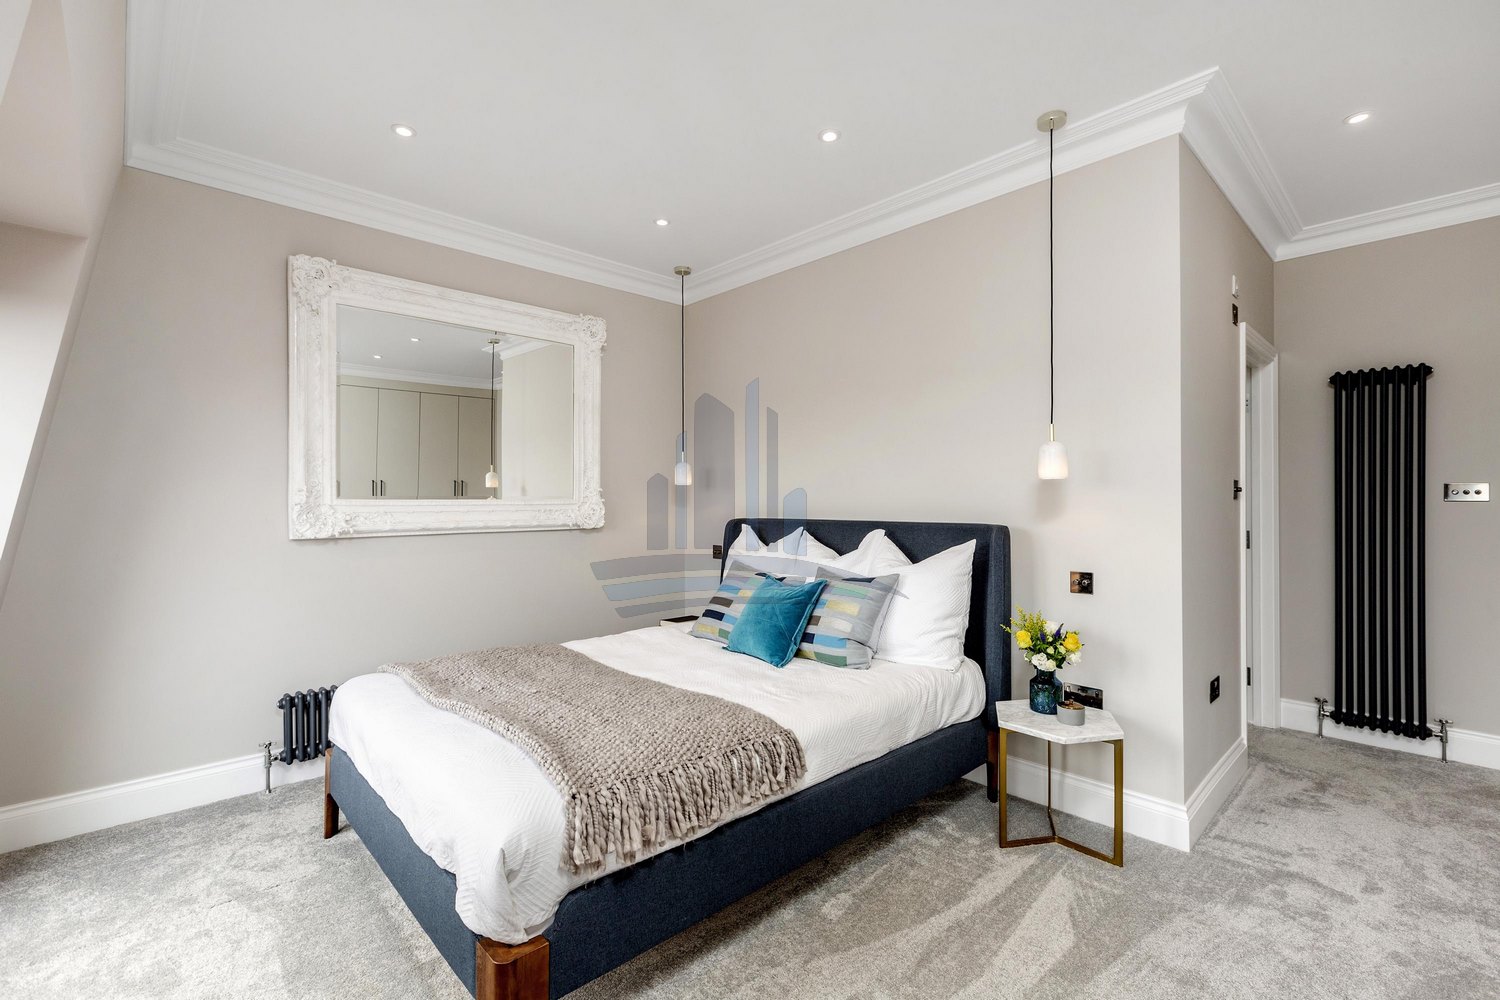 bed with pillows in bedroom with built-in wardrobe remodelled by loft conversion company london